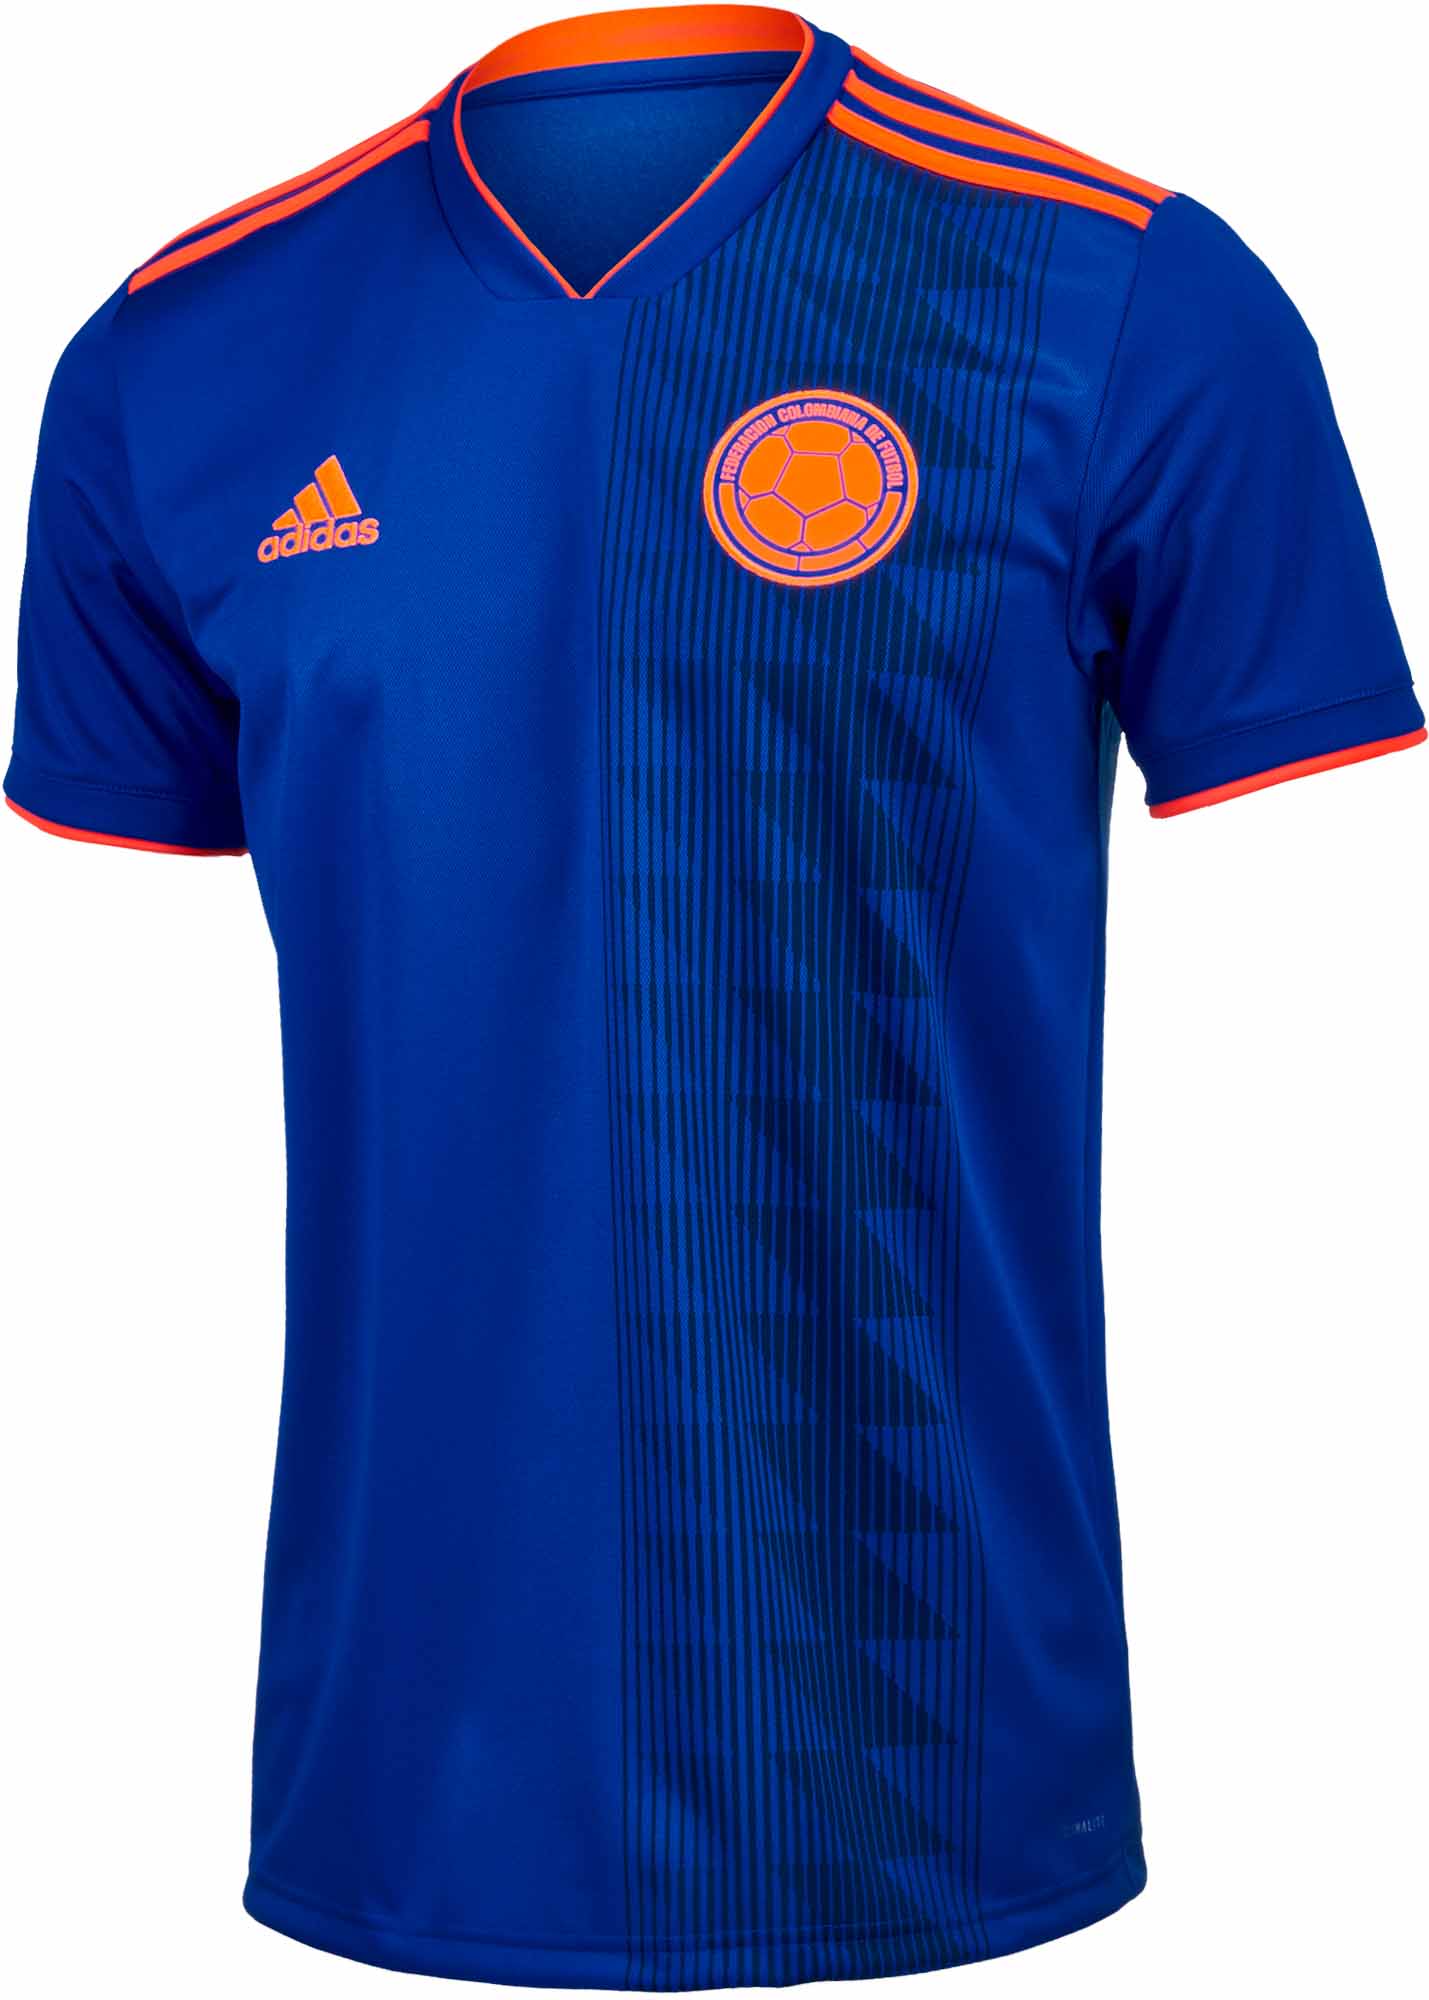 colombia away kit 2018